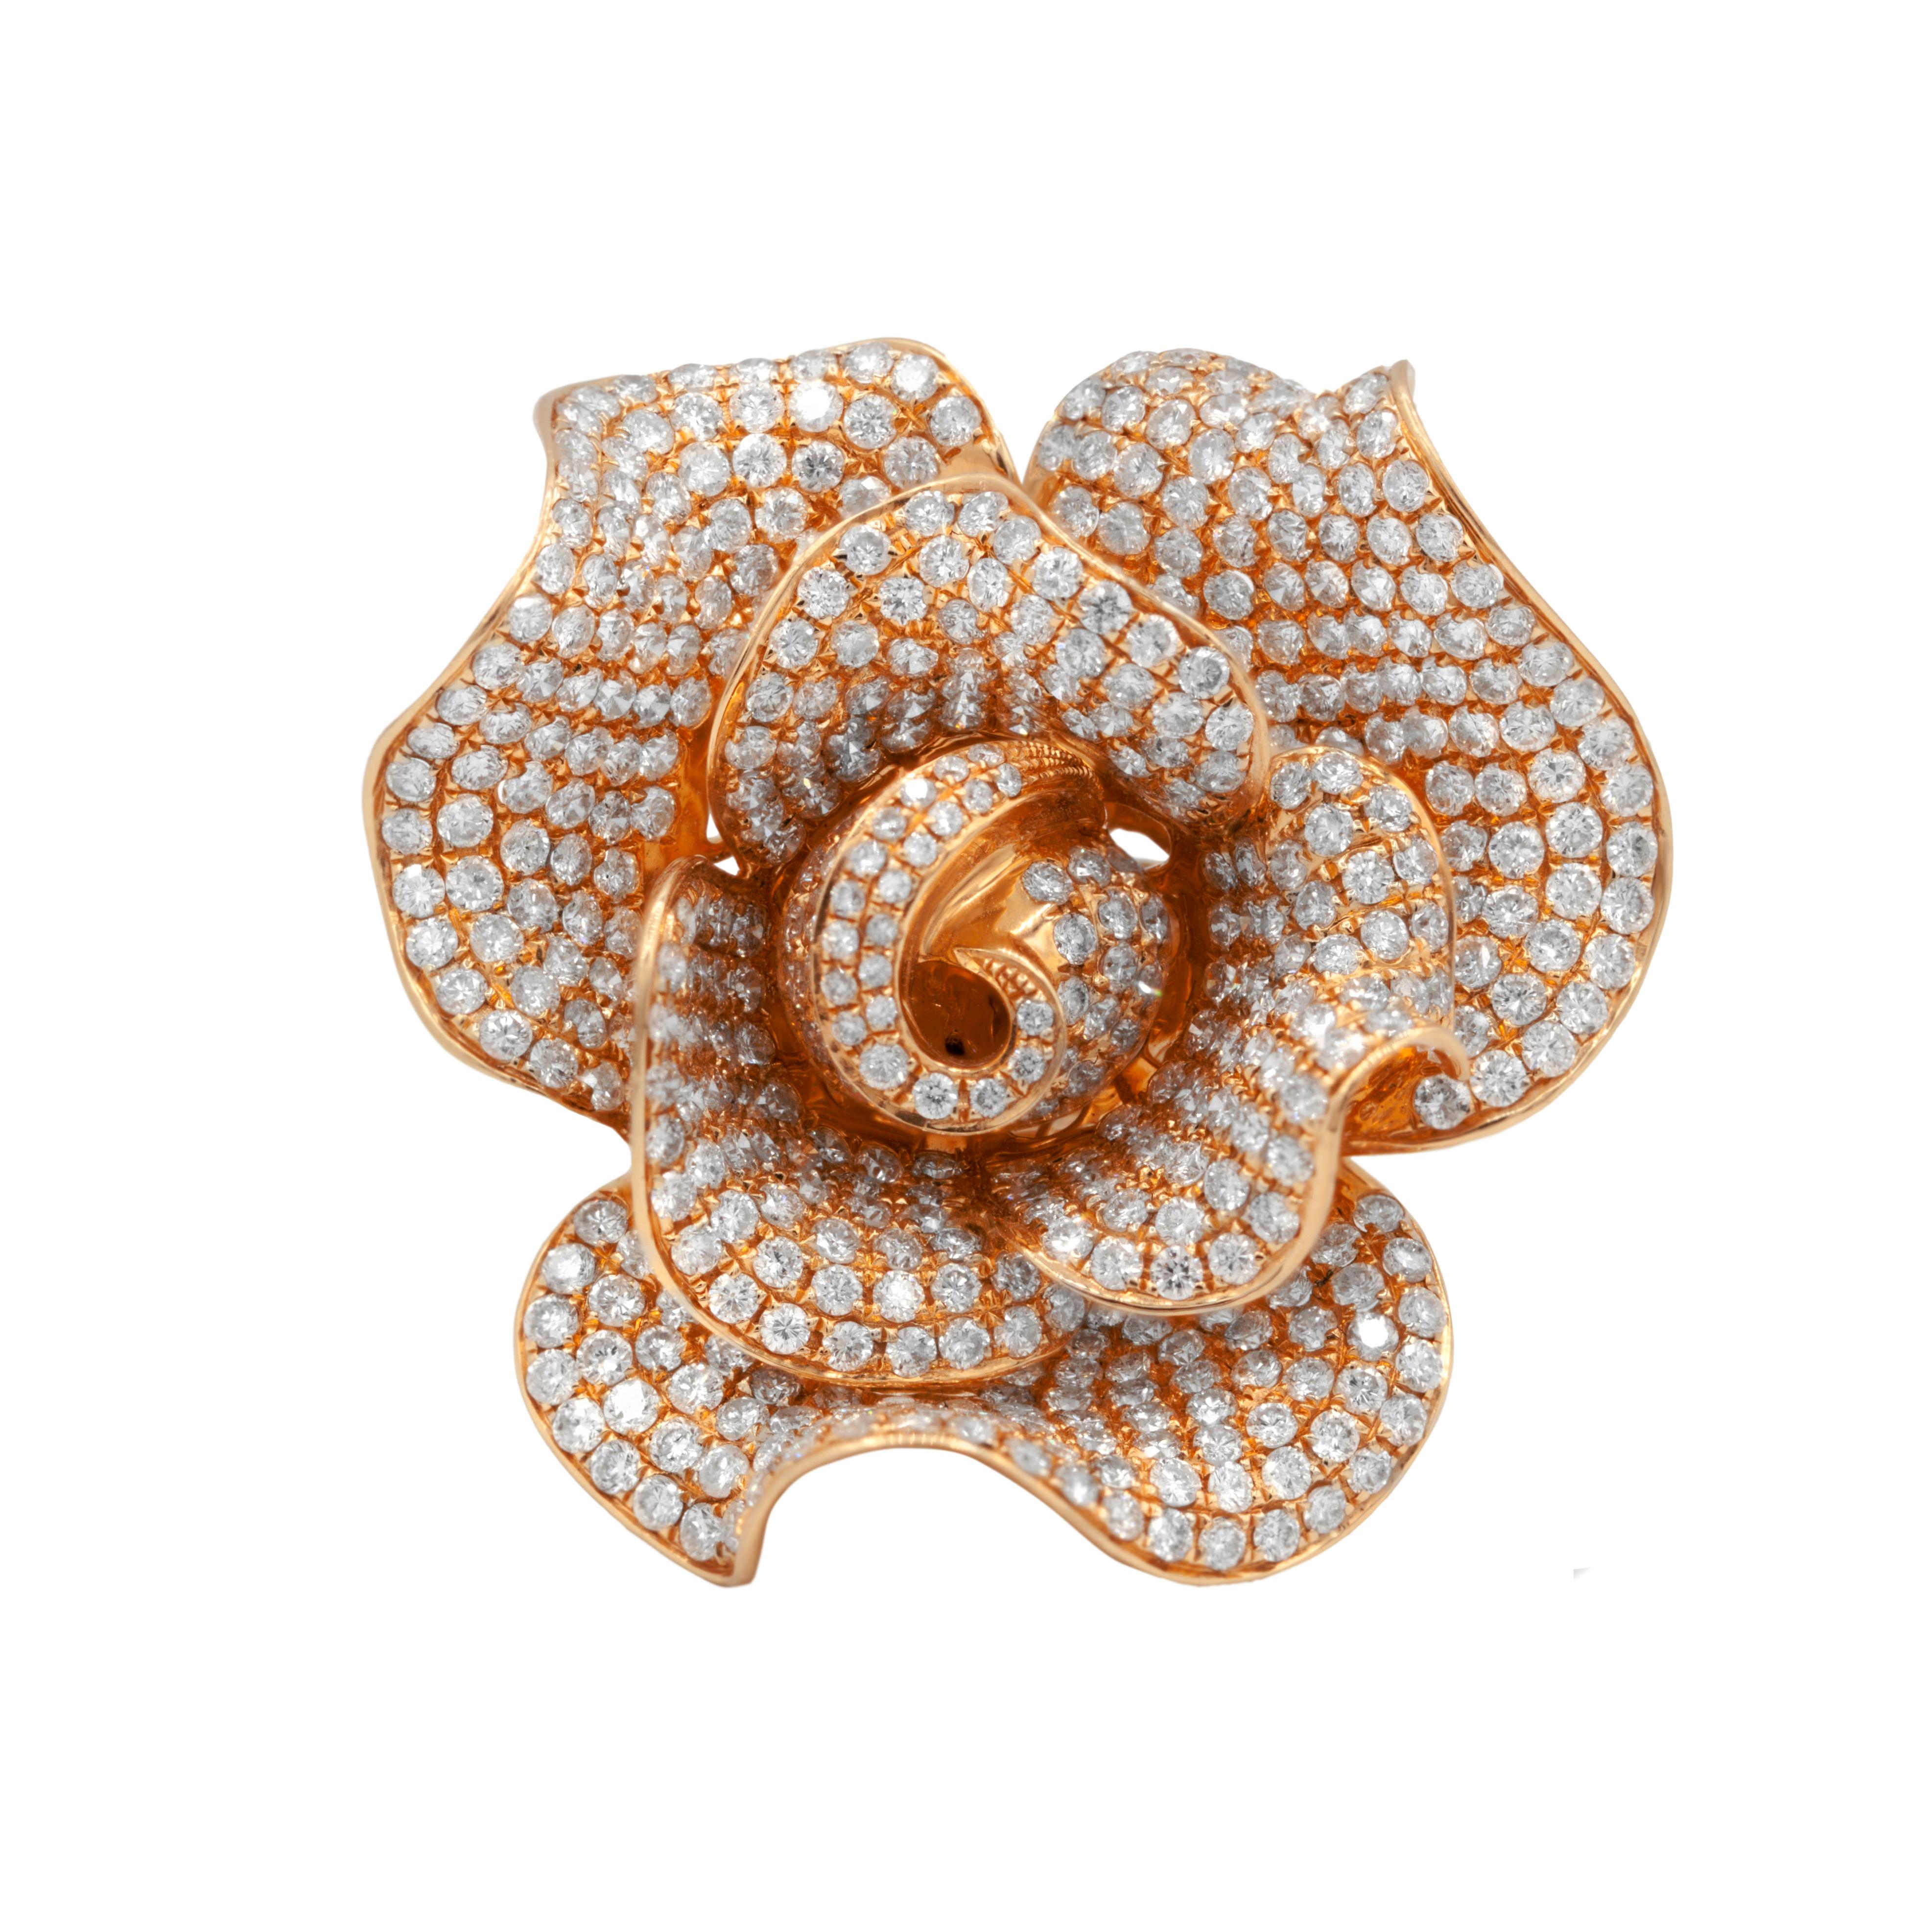 18 kt rose gold diamond fashion ring with a rose design containing 7.50 cts tw of diamonds that can be removed and worn as a brooch.
Diana M. is a leading supplier of top-quality fine jewelry for over 35 years.
Diana M is one-stop shop for all your